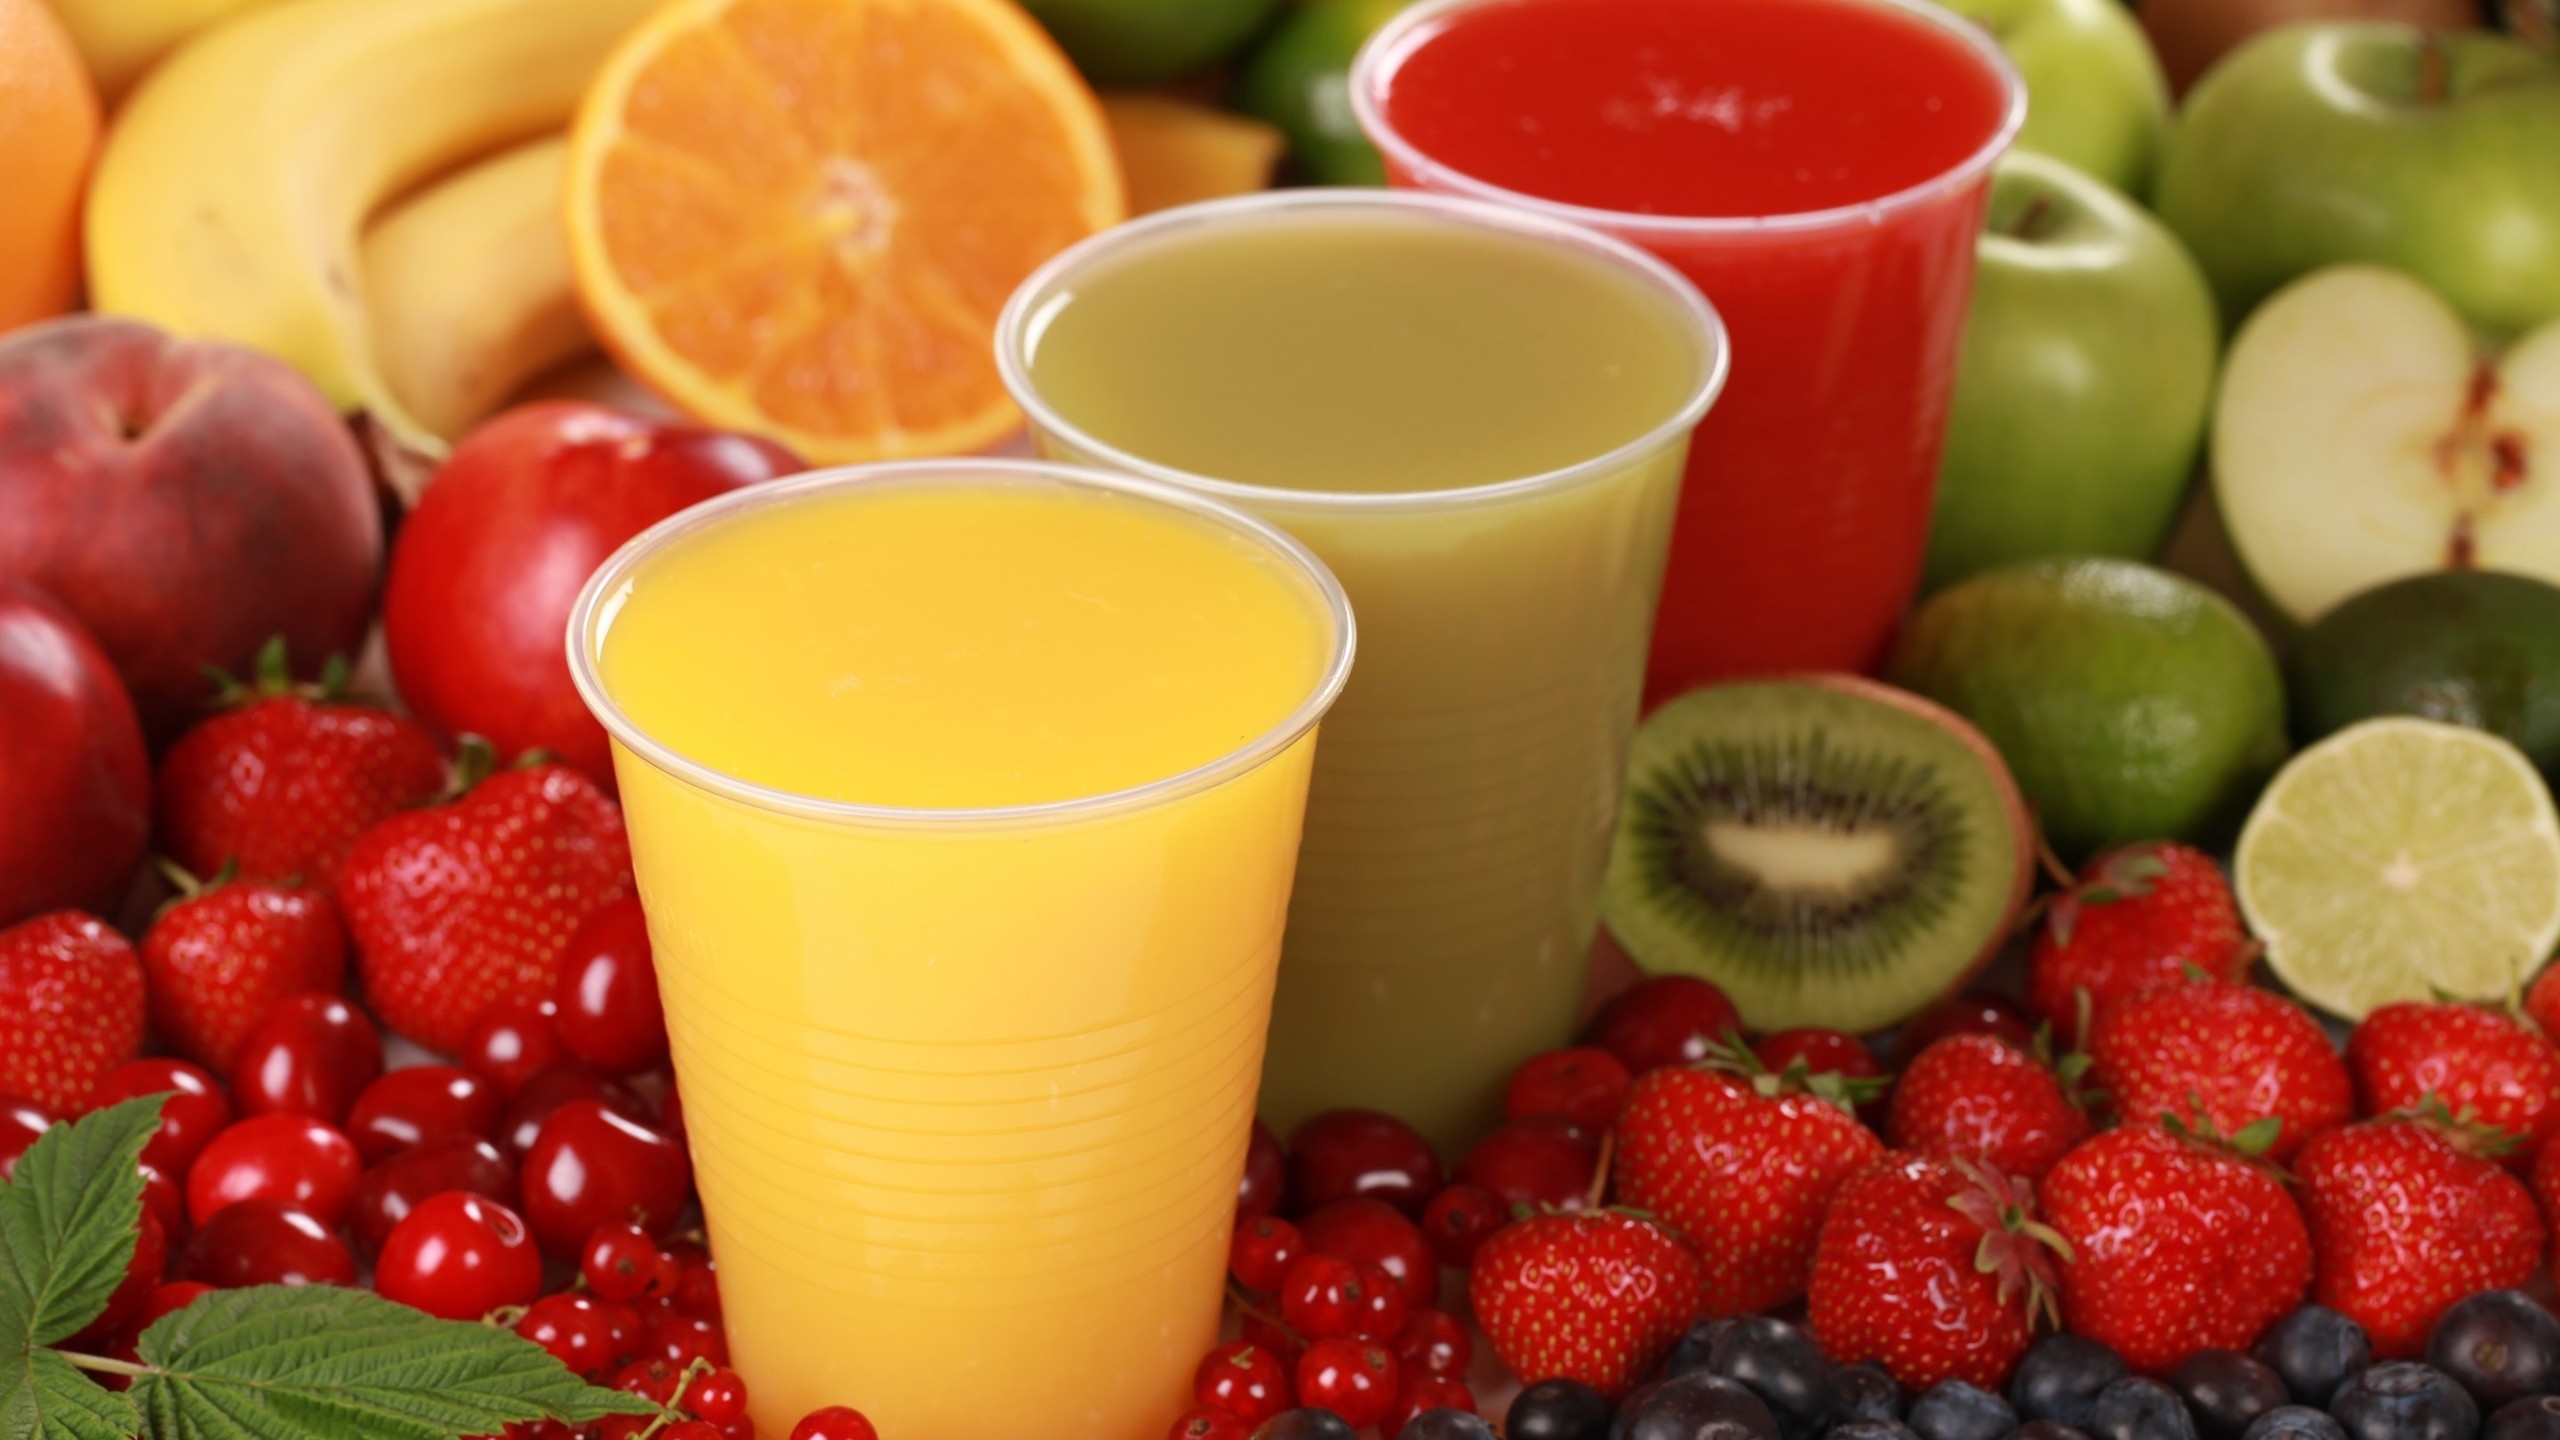 Fruits Juices for 2560x1440 HDTV resolution